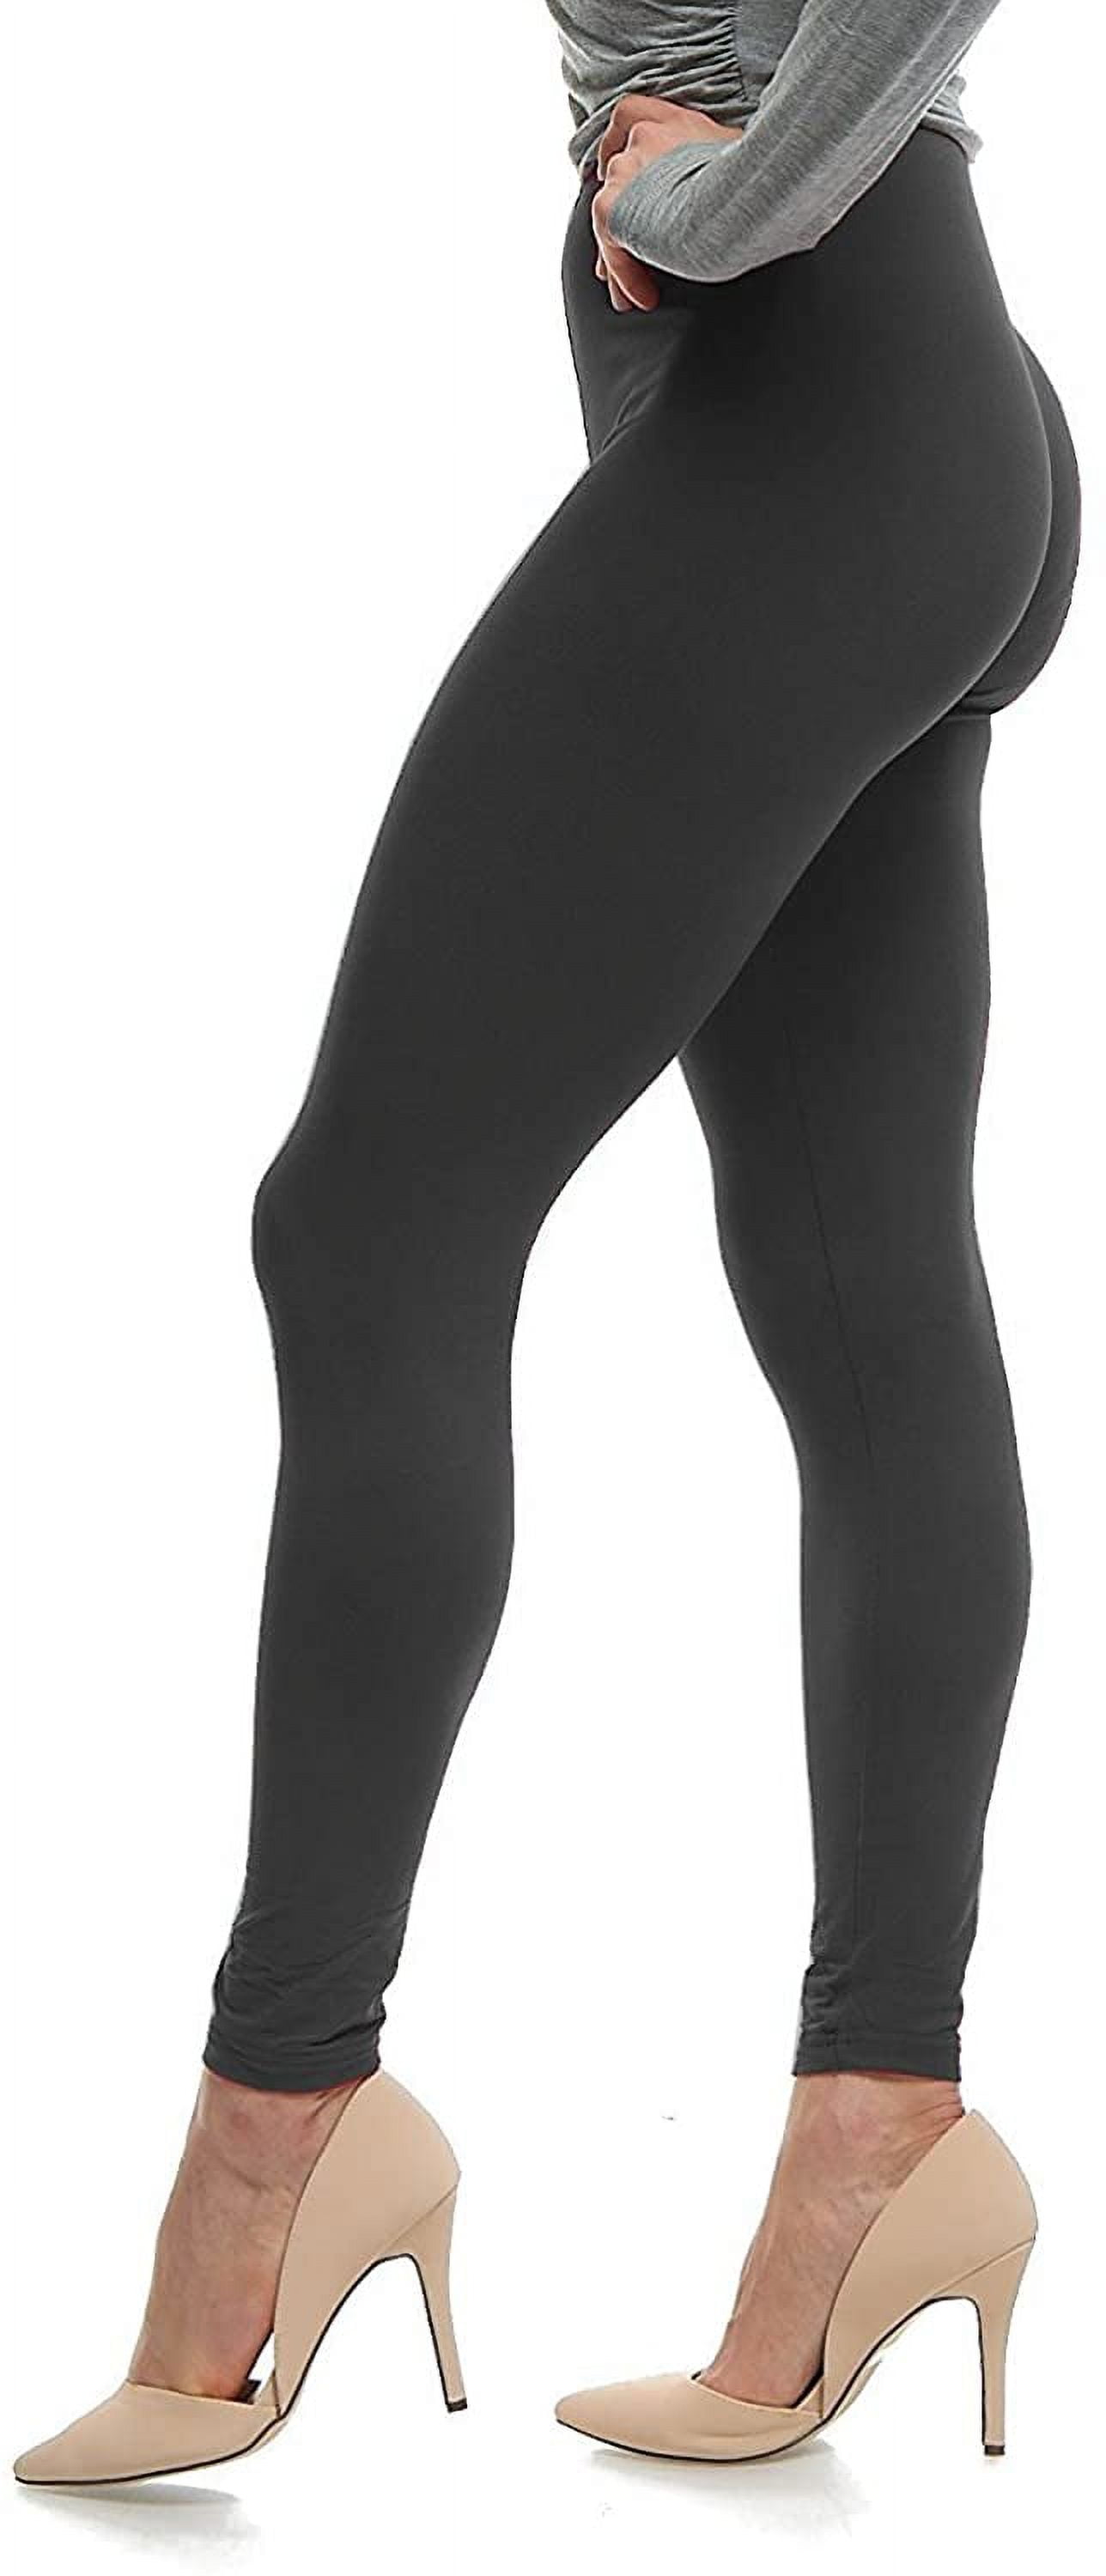 LMB Lush Moda Women's Leggings Basic Polyester - Extra Buttery Soft with  Slimming Fit for Casual Wear, Lounging, Yoga, Exercise and Layering - Many